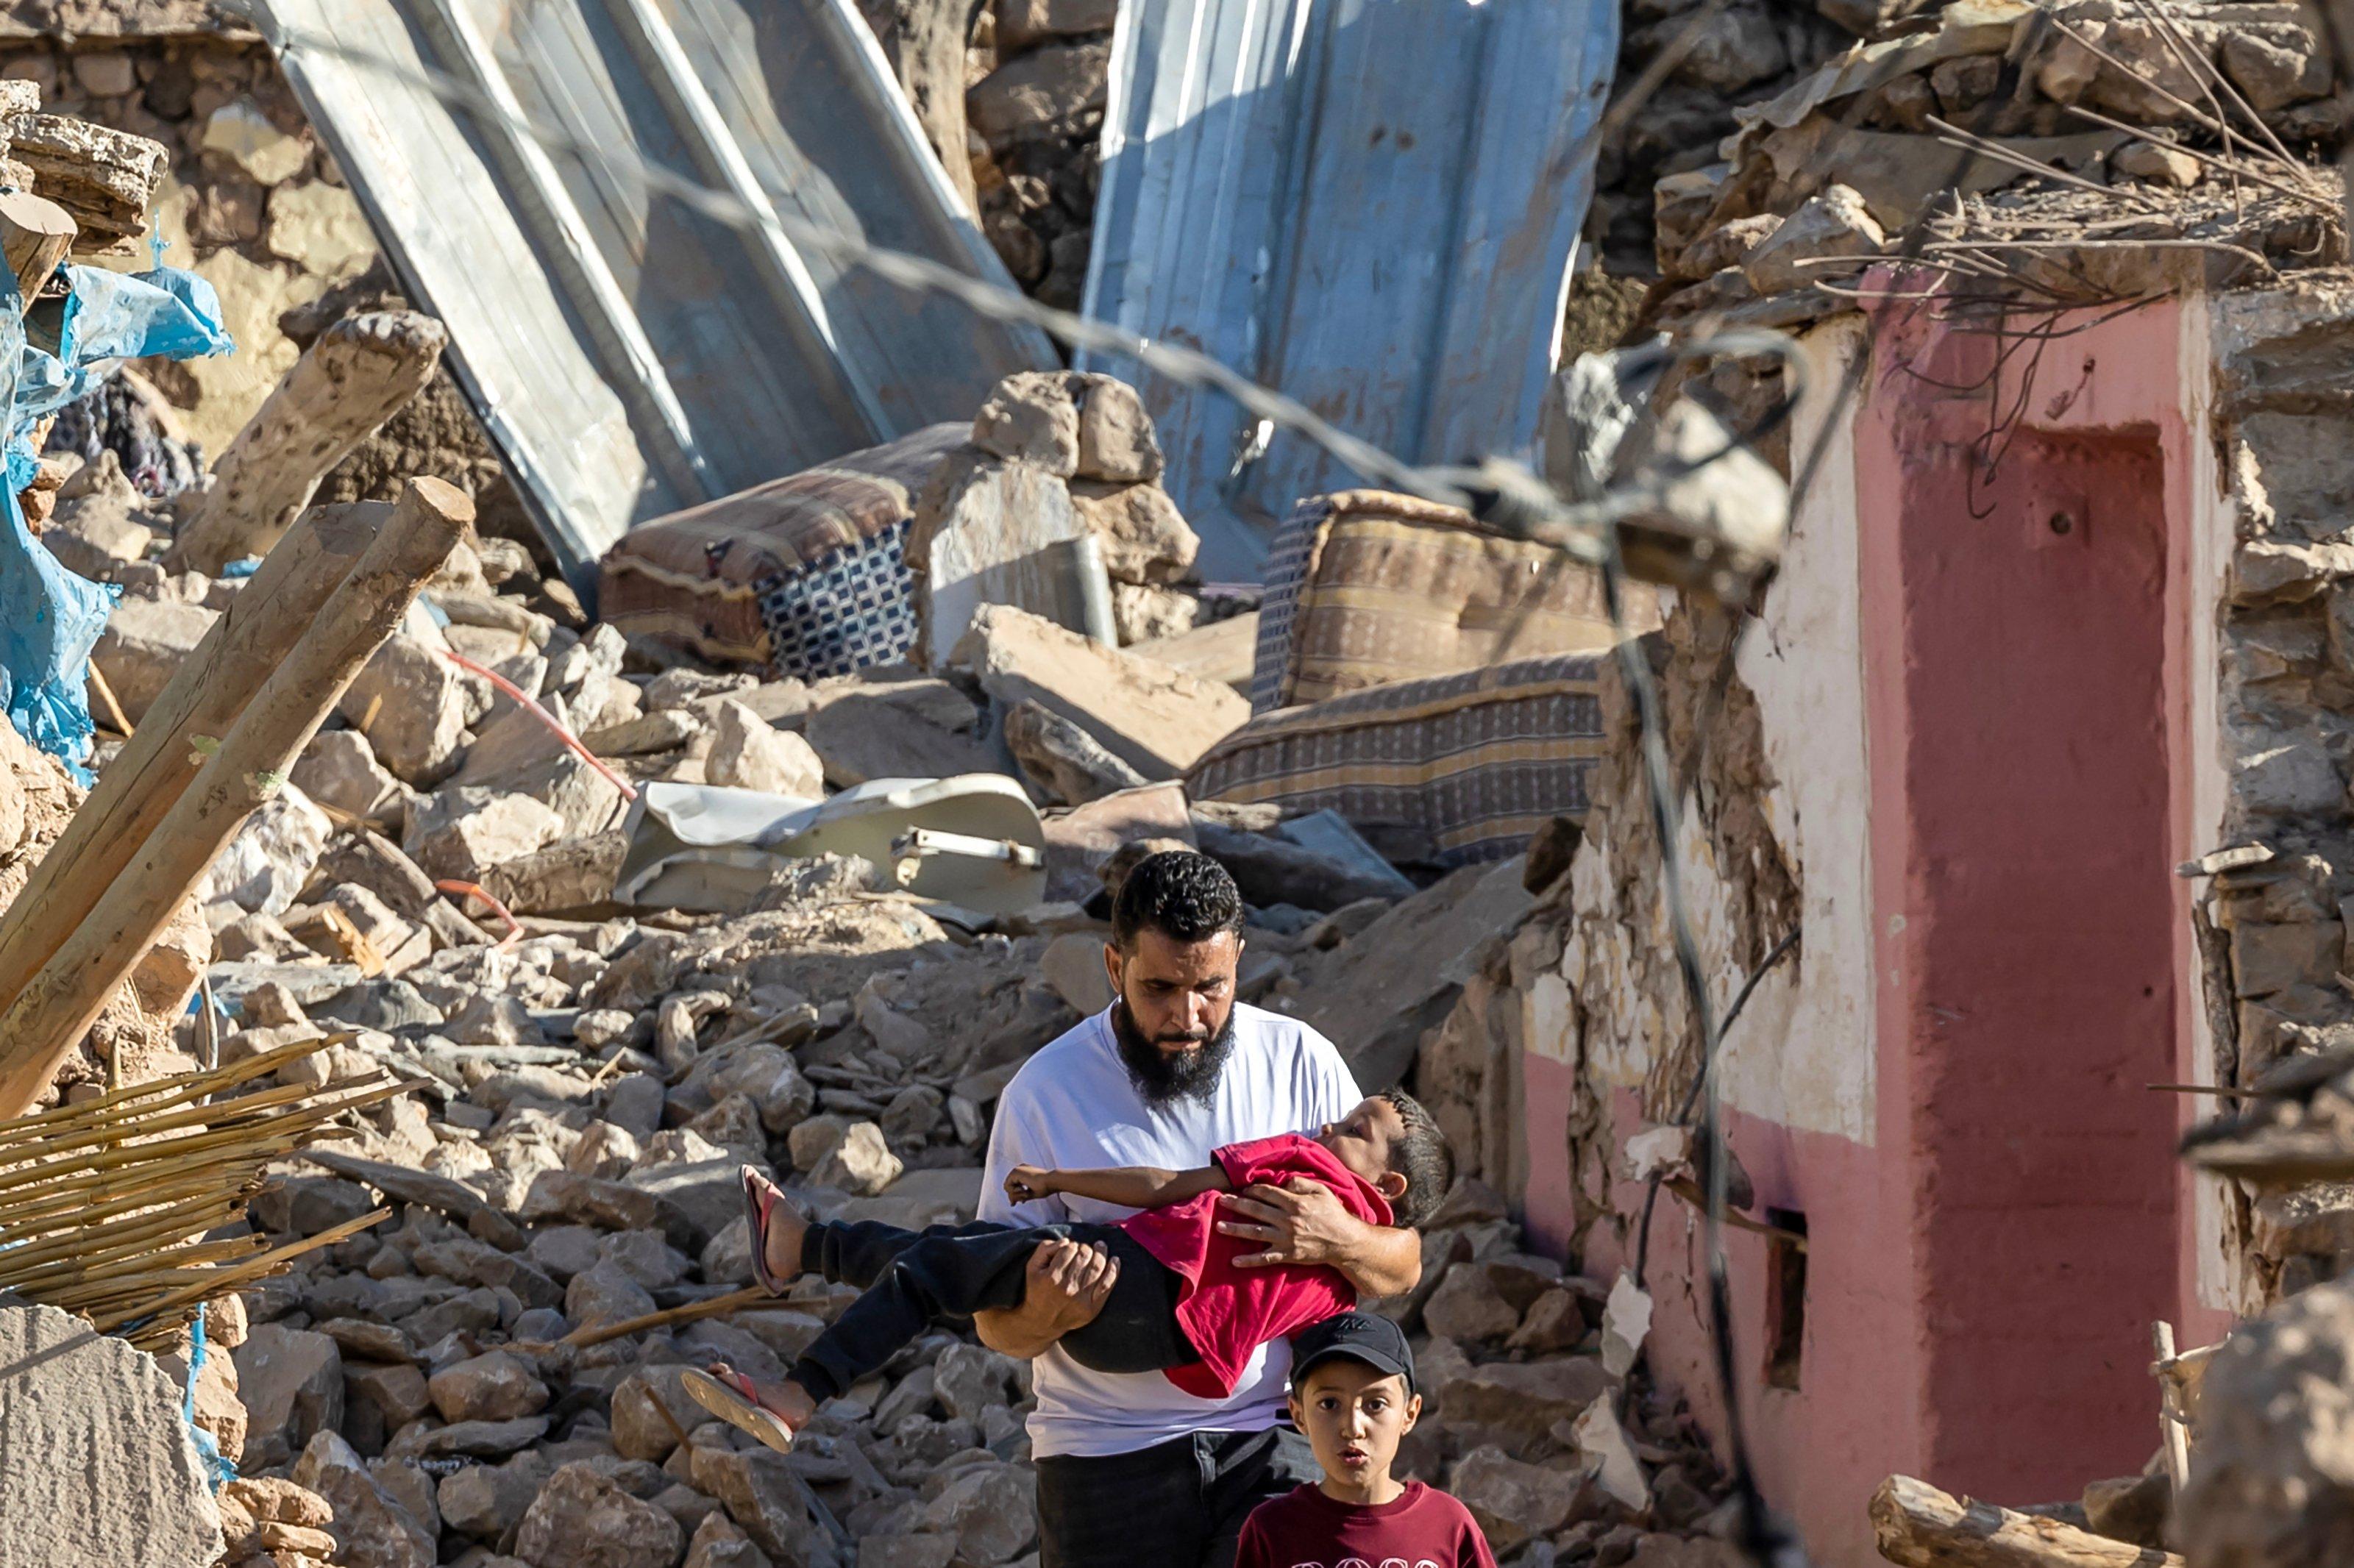 A man carries a boy as he walks past destroyed houses after an earthquake in the mountain village of Tafeghaghte, southwest of Marrakesh, on September 9, 2023. - Moroccans on September 10 mourned the victims of a devastating earthquake that killed more than 2,000 people, as rescue teams raced to find survivors trapped in the rubble of flattened villages. (Photo by Fadel SENNA / AFP)